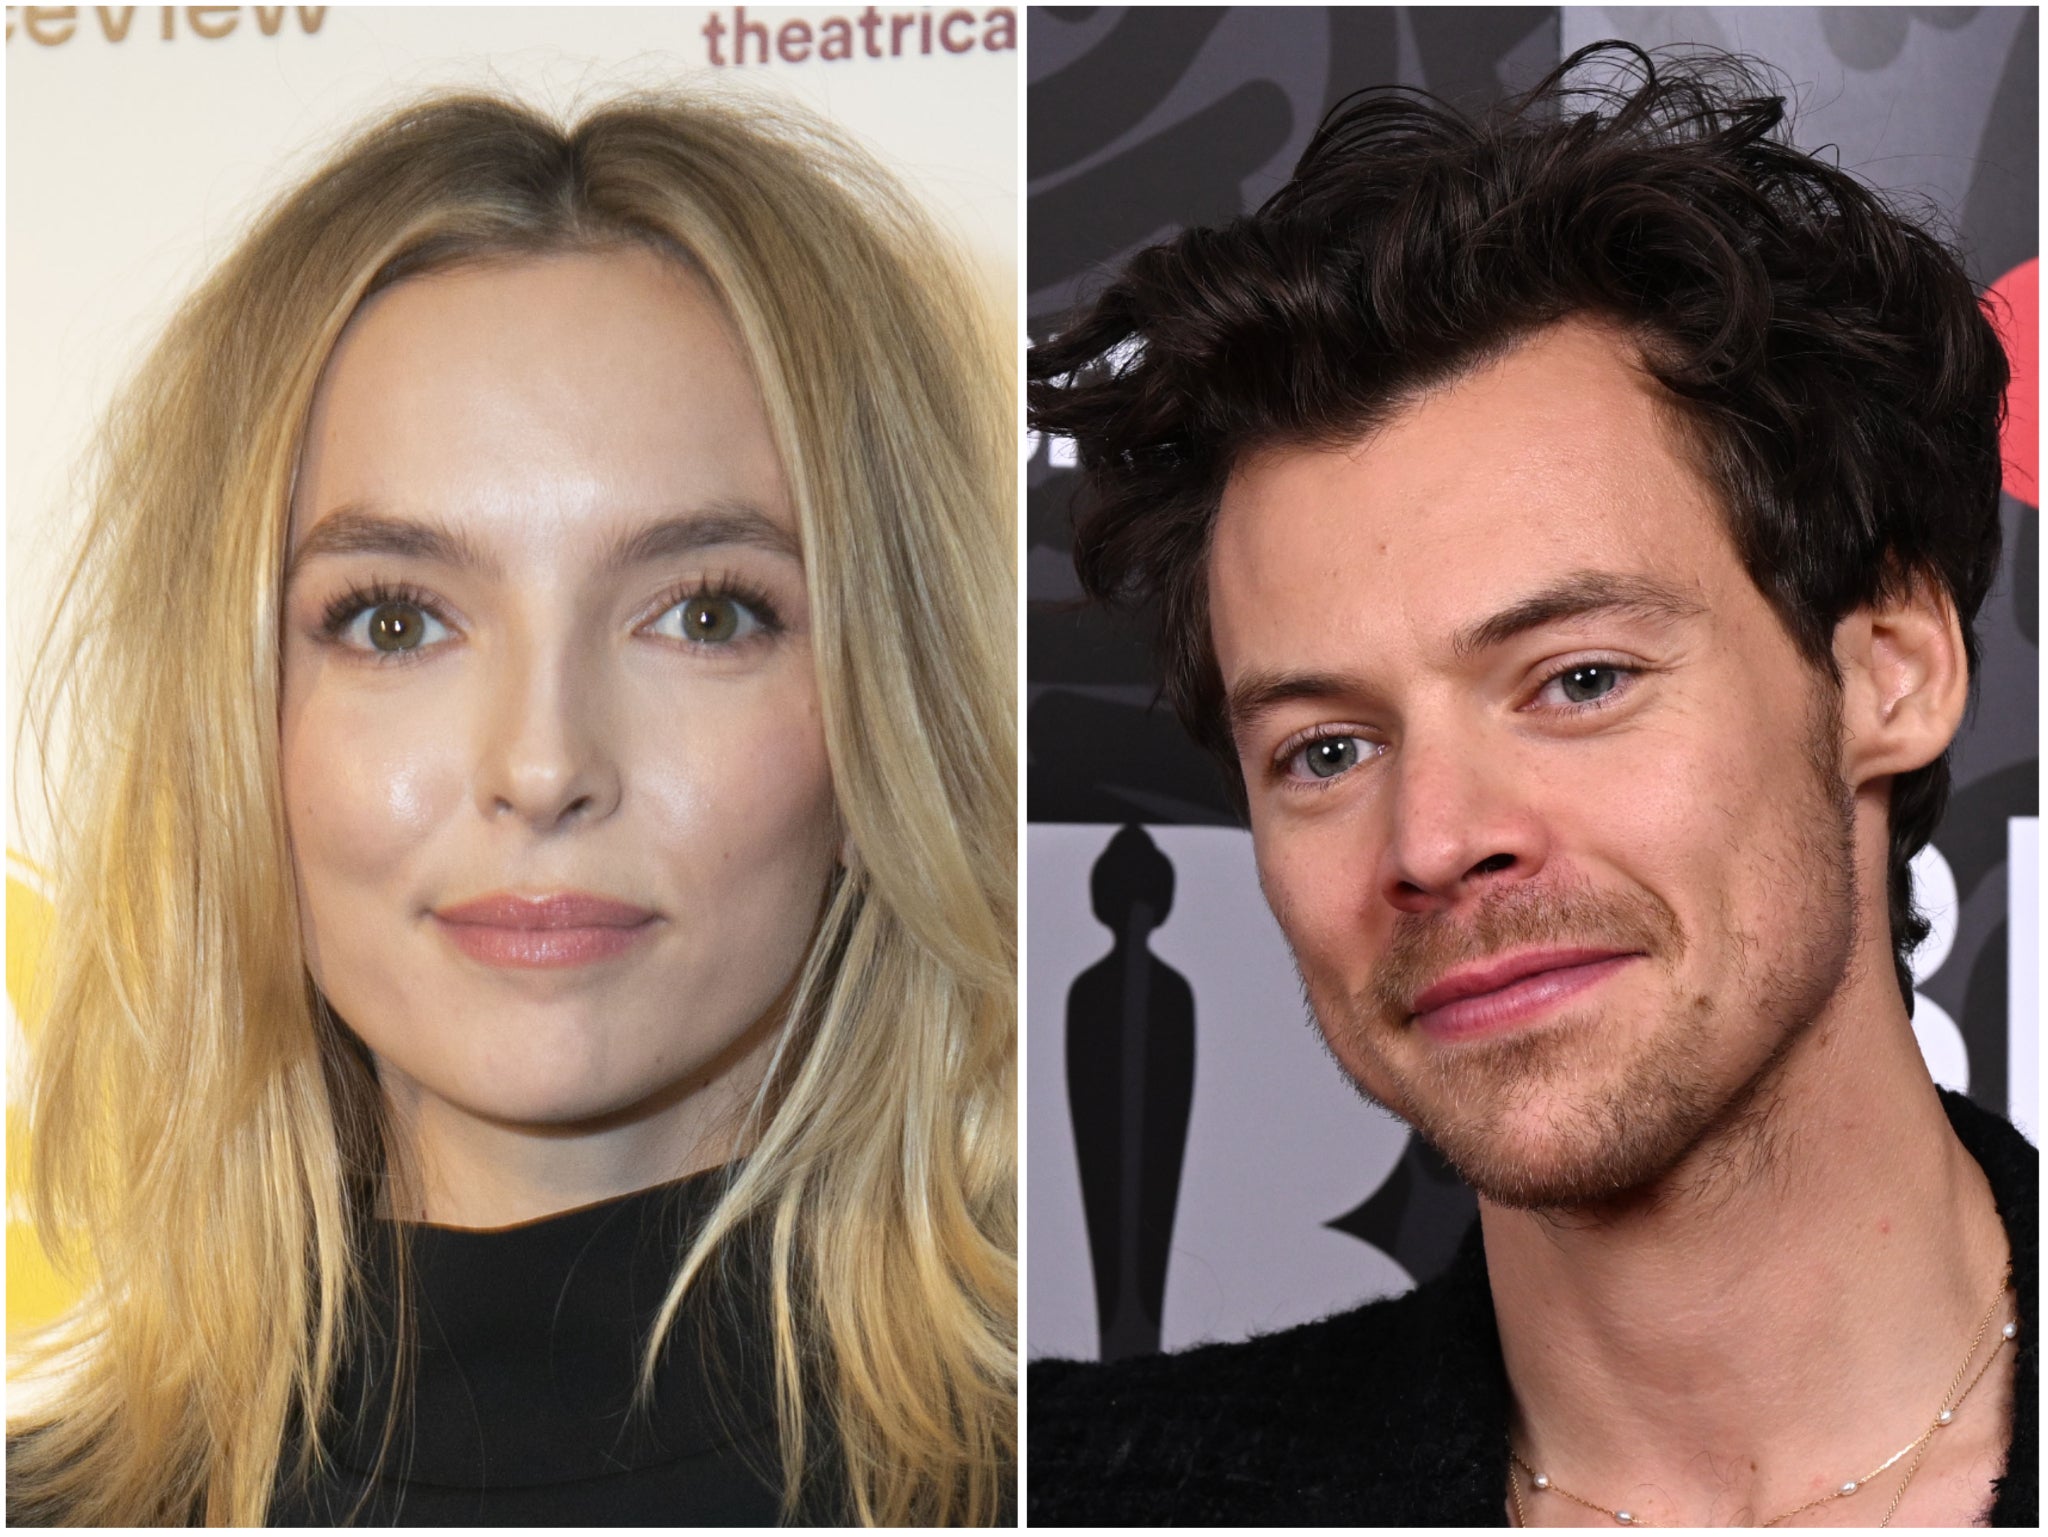 https://static.independent.co.uk/2023/02/17/16/Jodie-Comer-Harry-Styles.jpg